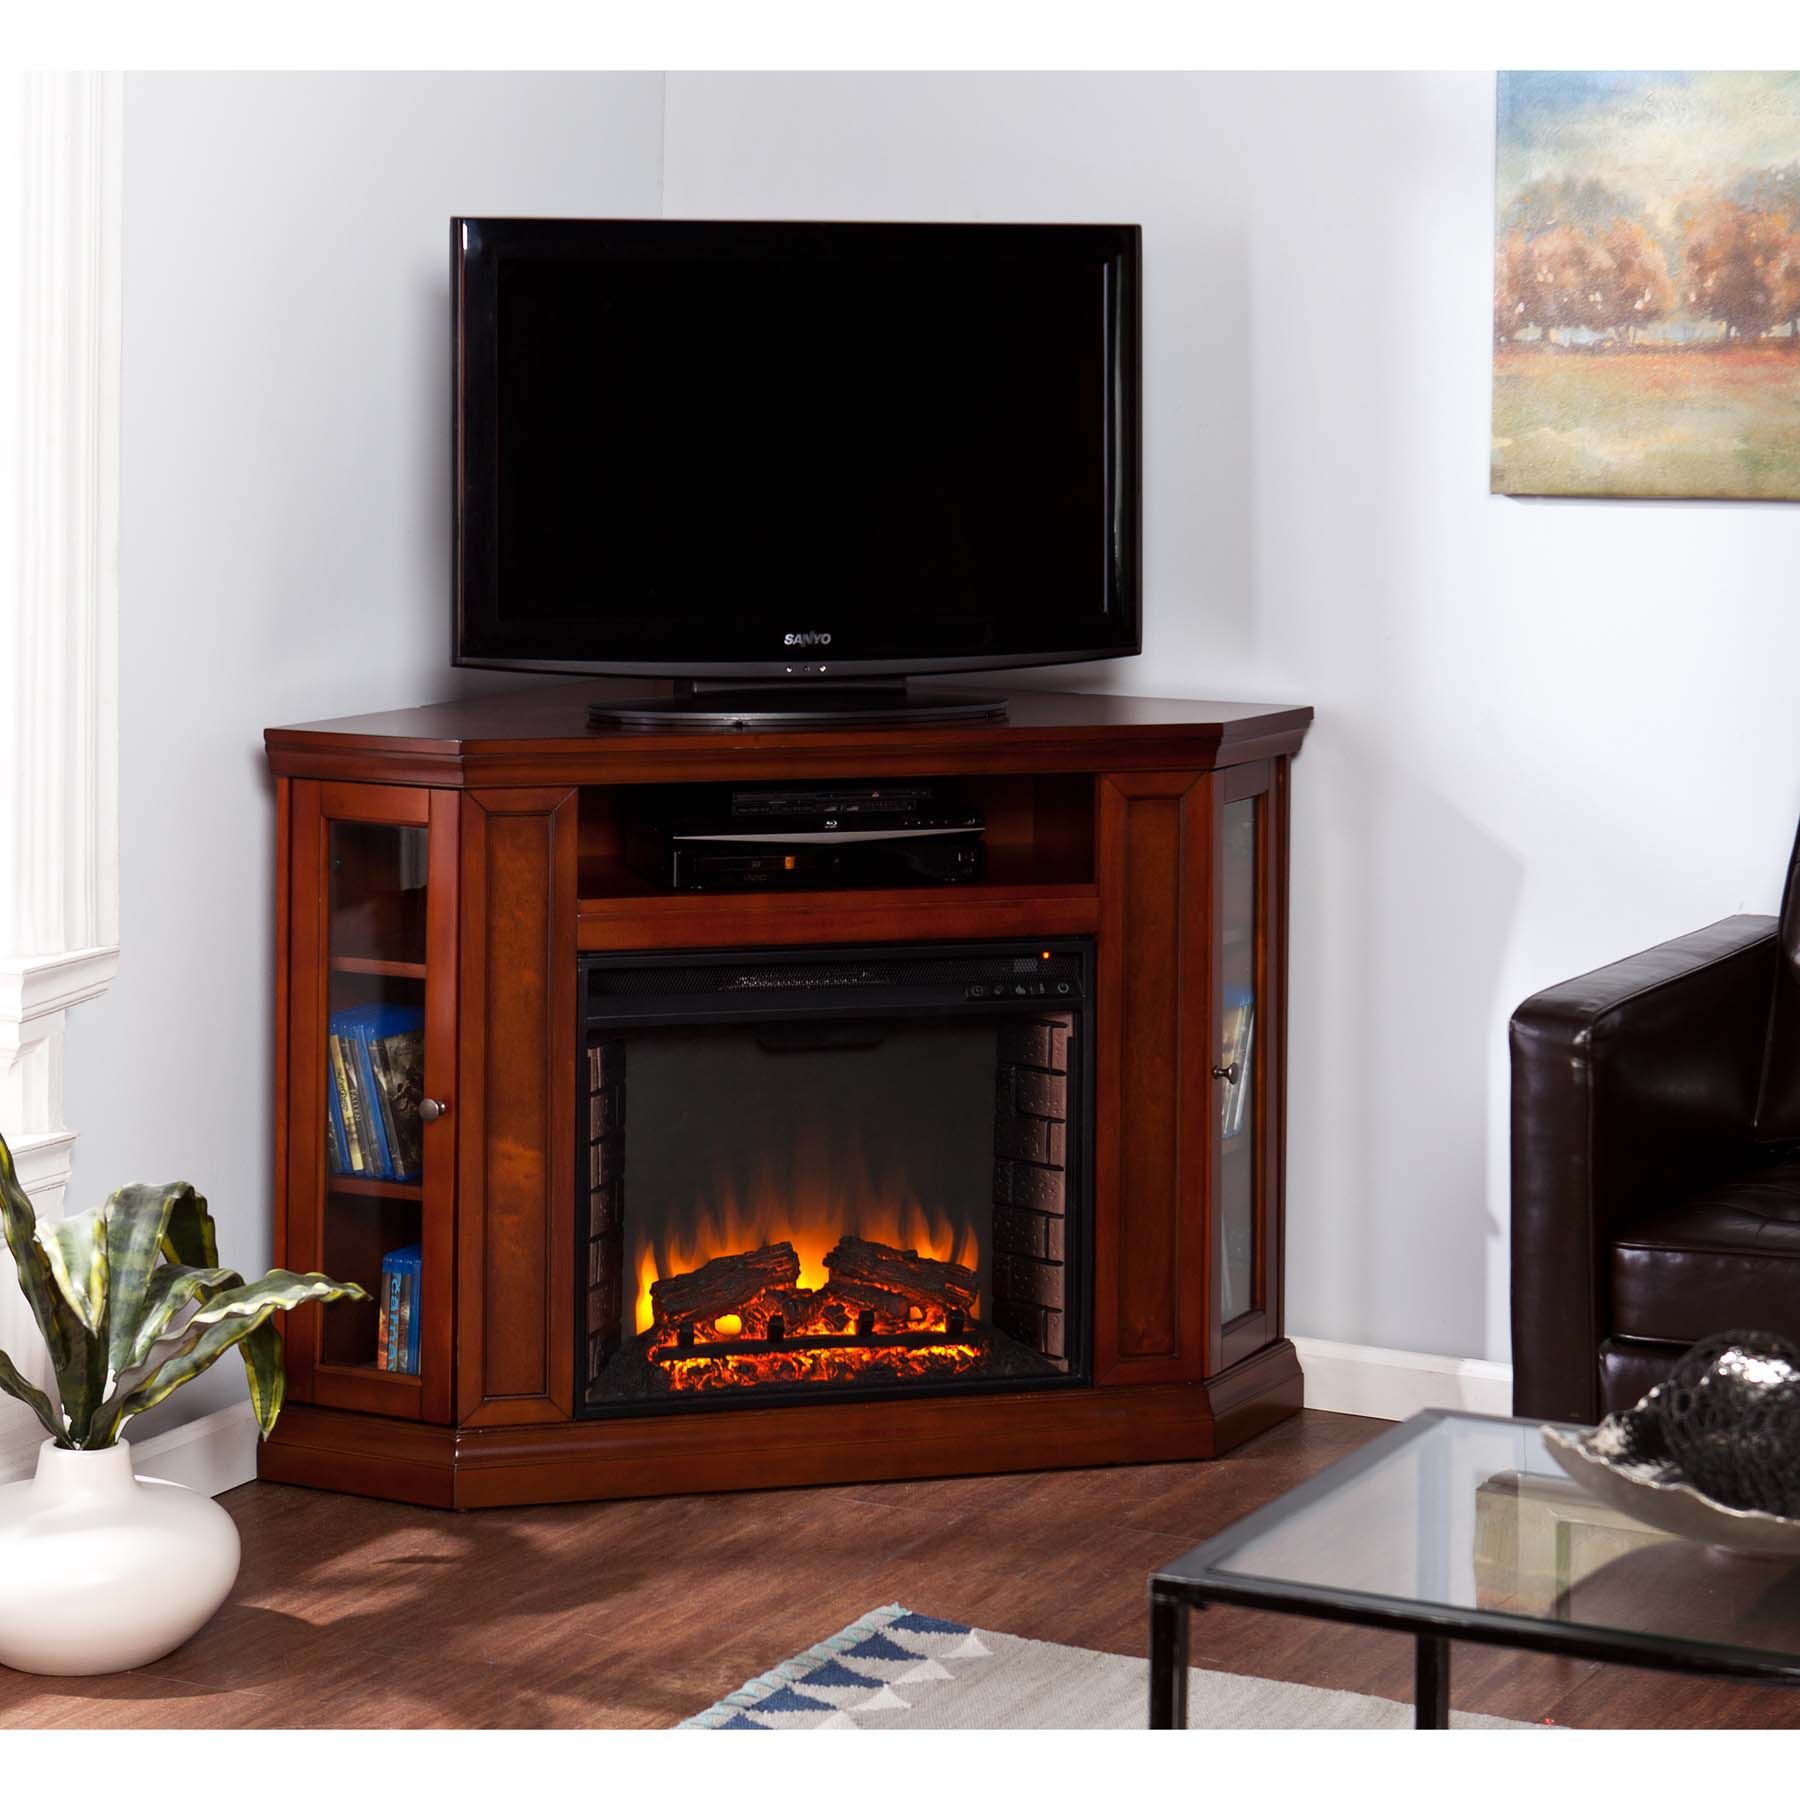 Portable Fireplace Indoor Best Of 42 Best Rustic Fireplace Images